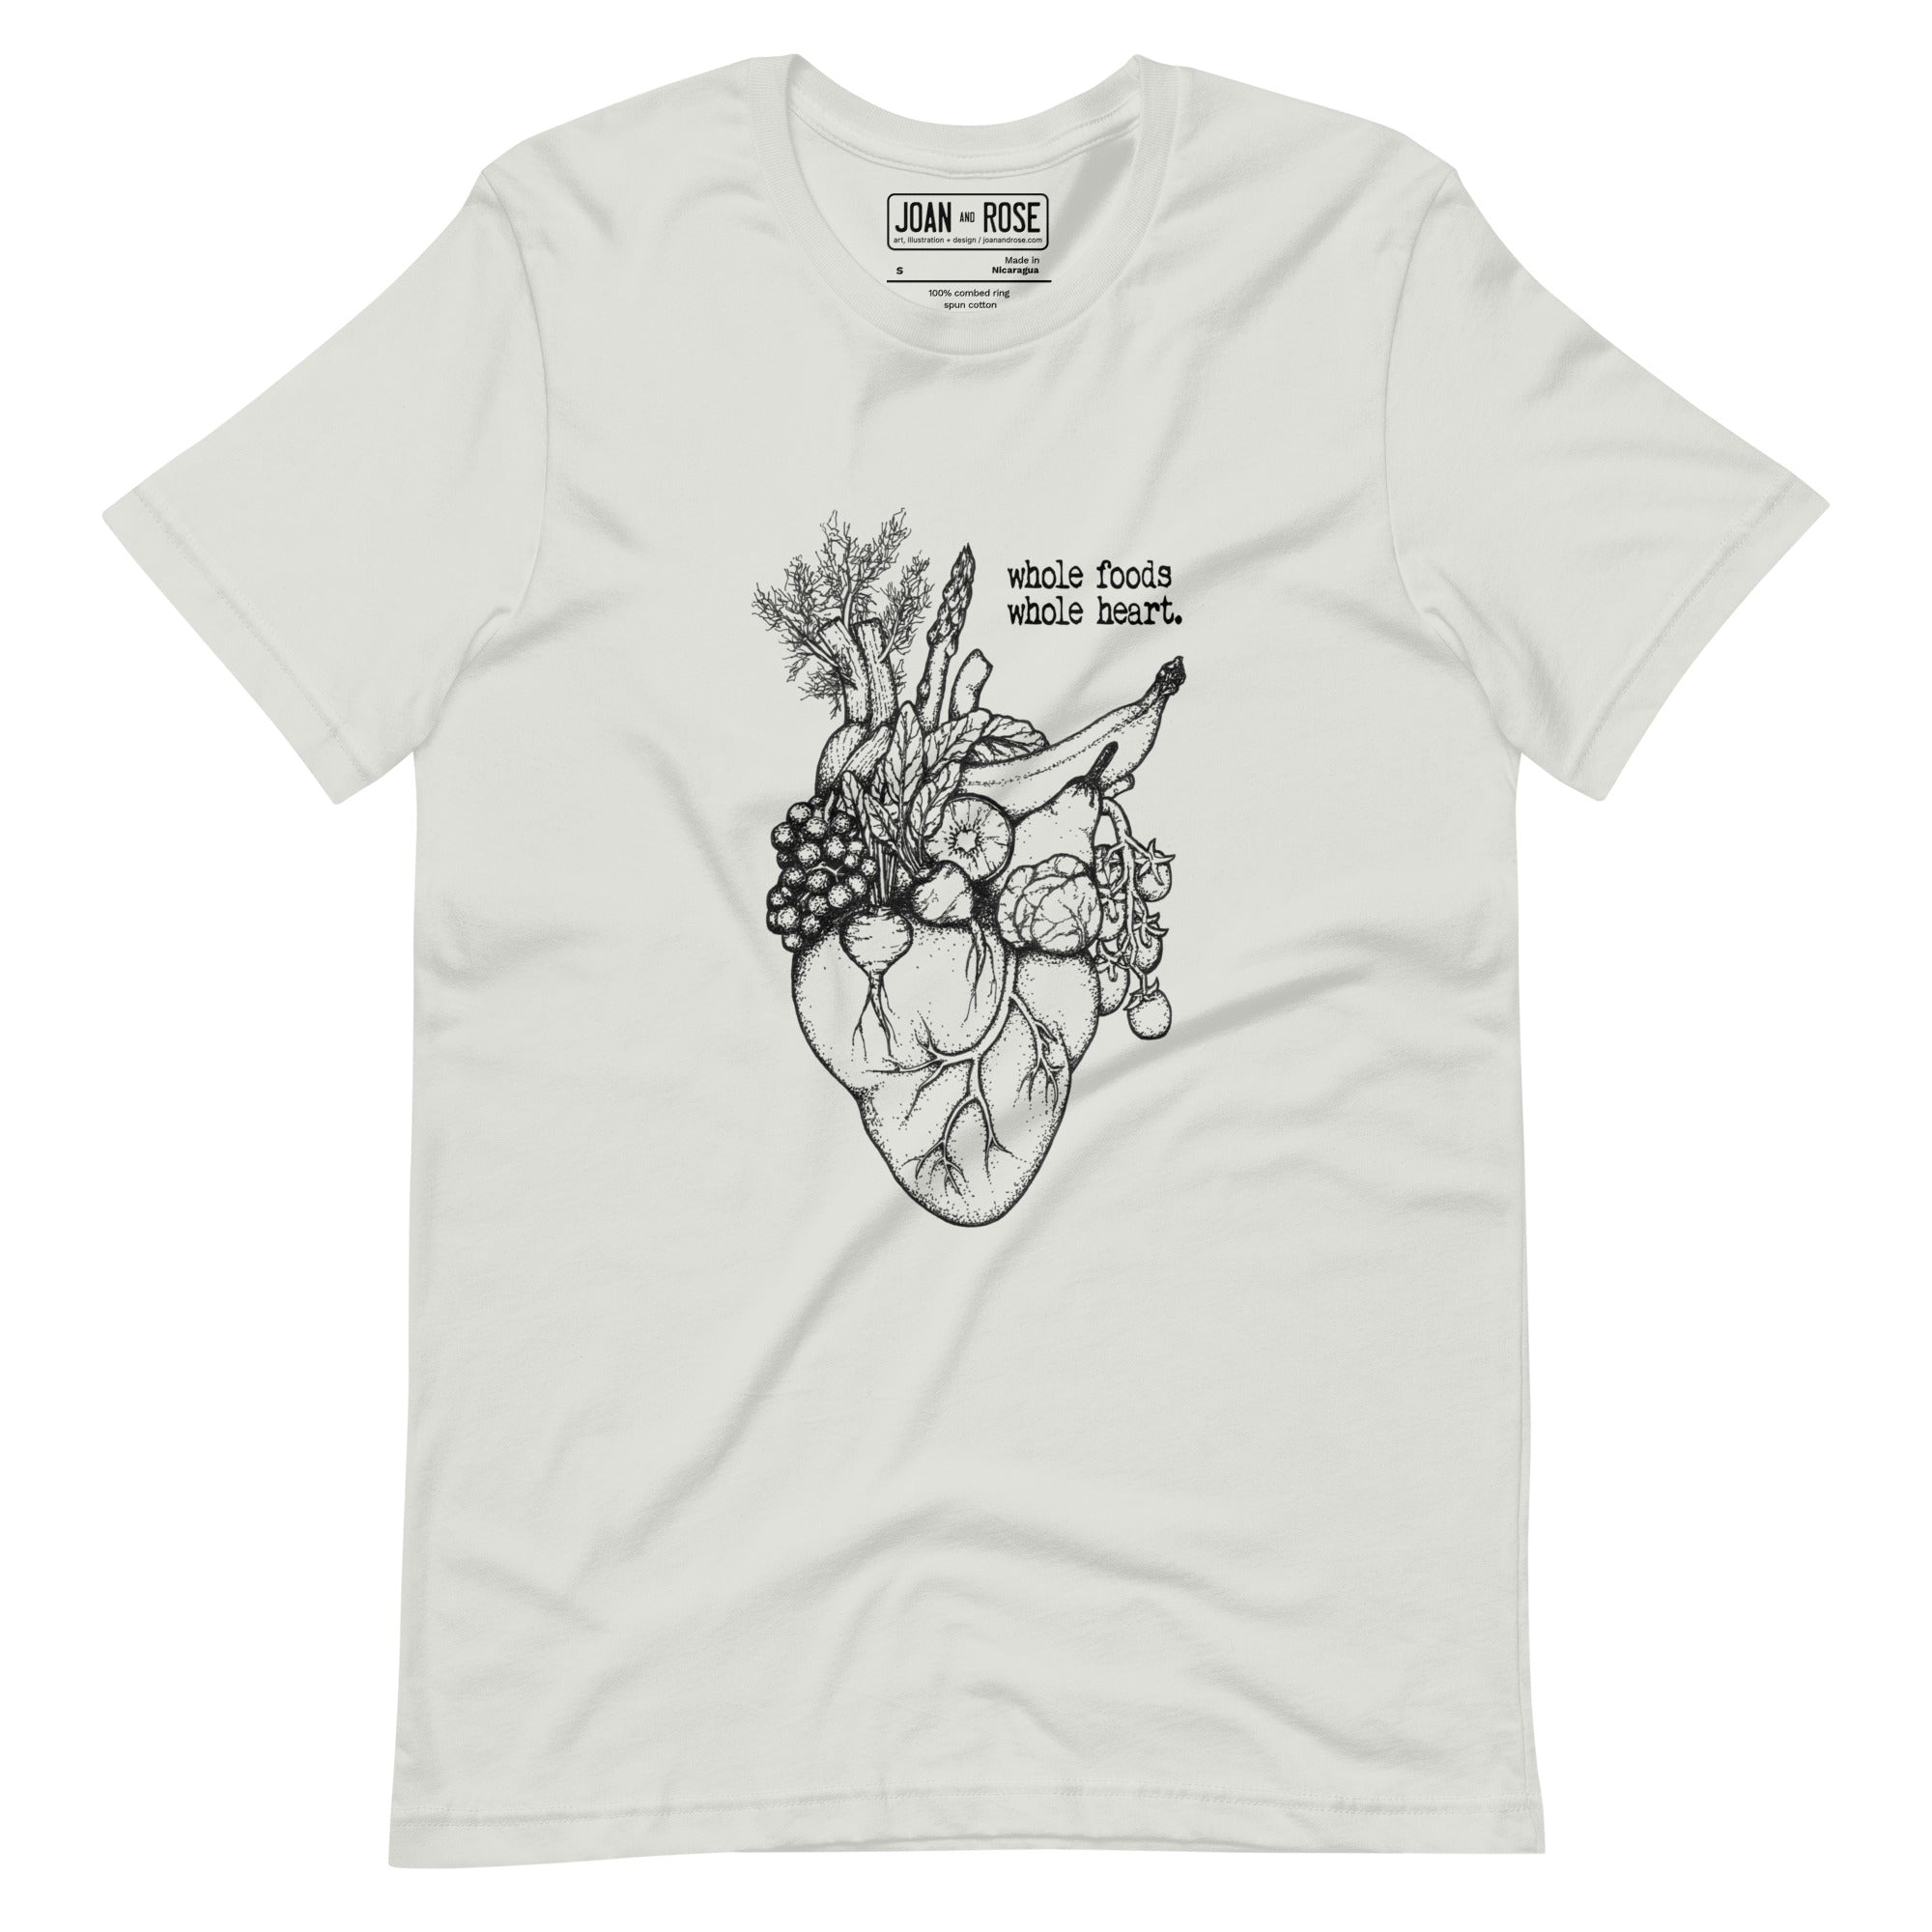 Silver version of Whole foods, Whole heart t-shirt